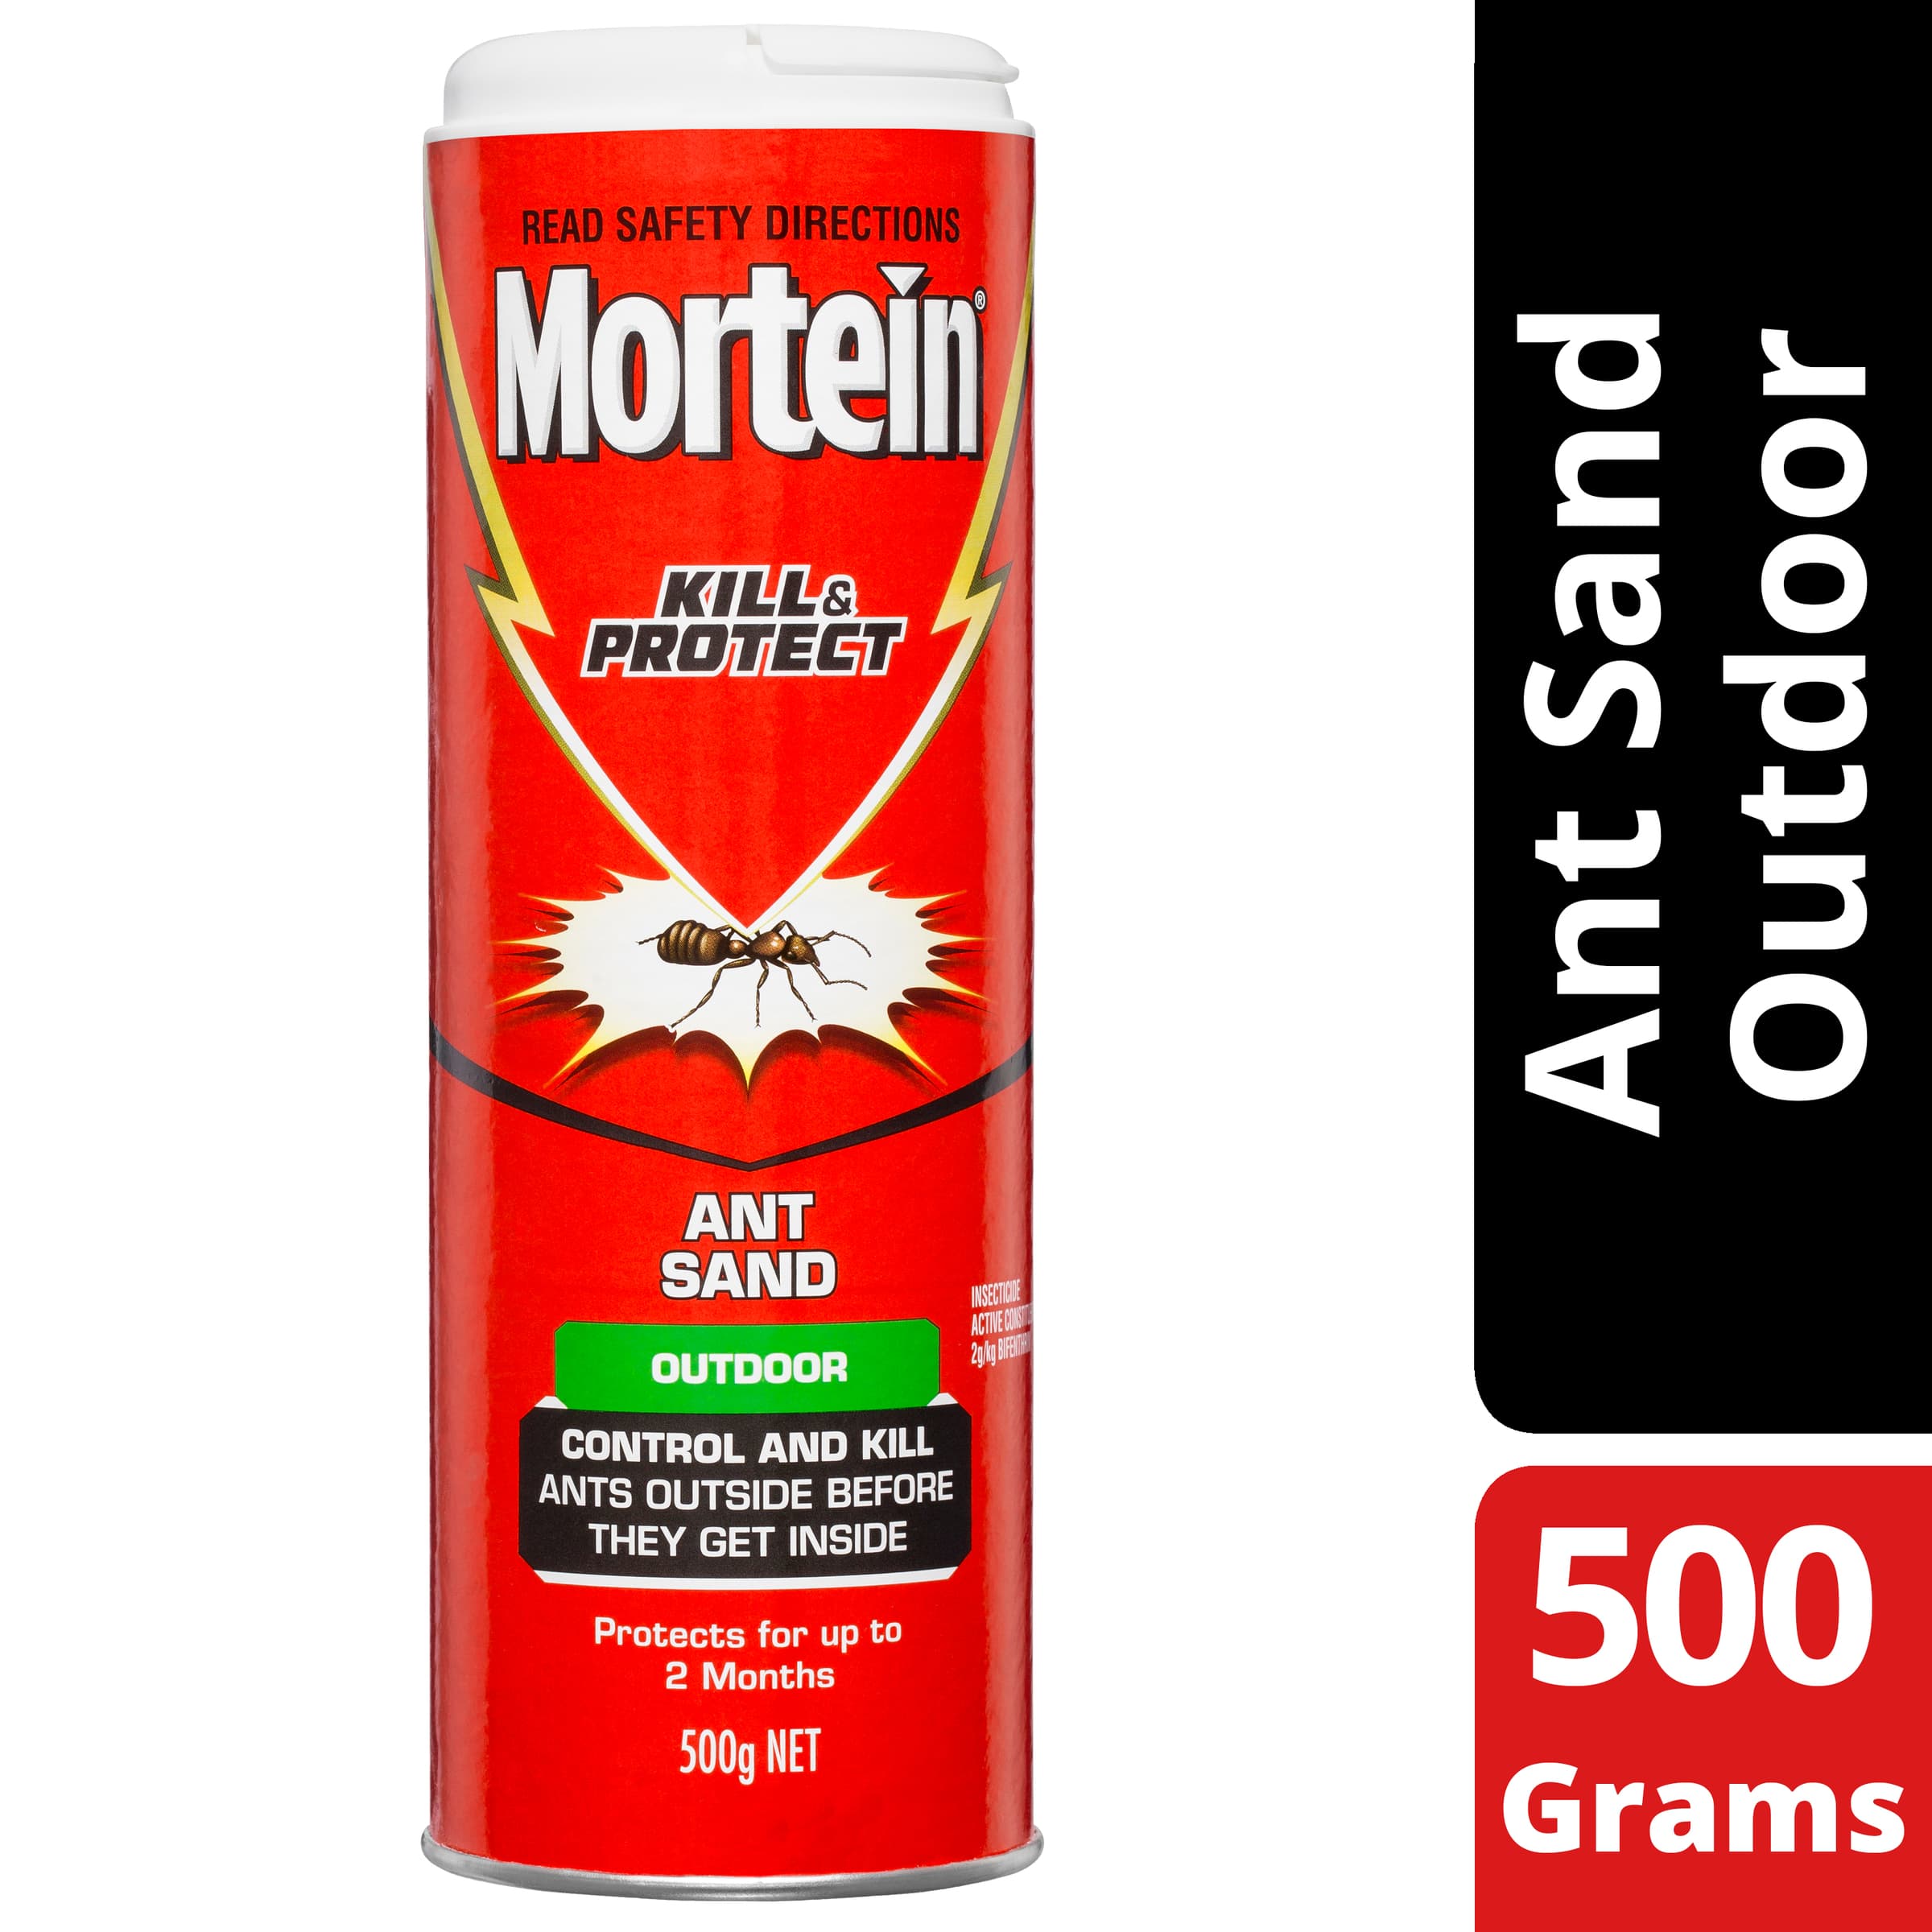 Mortein Kill & Protect Ant Sand 500g